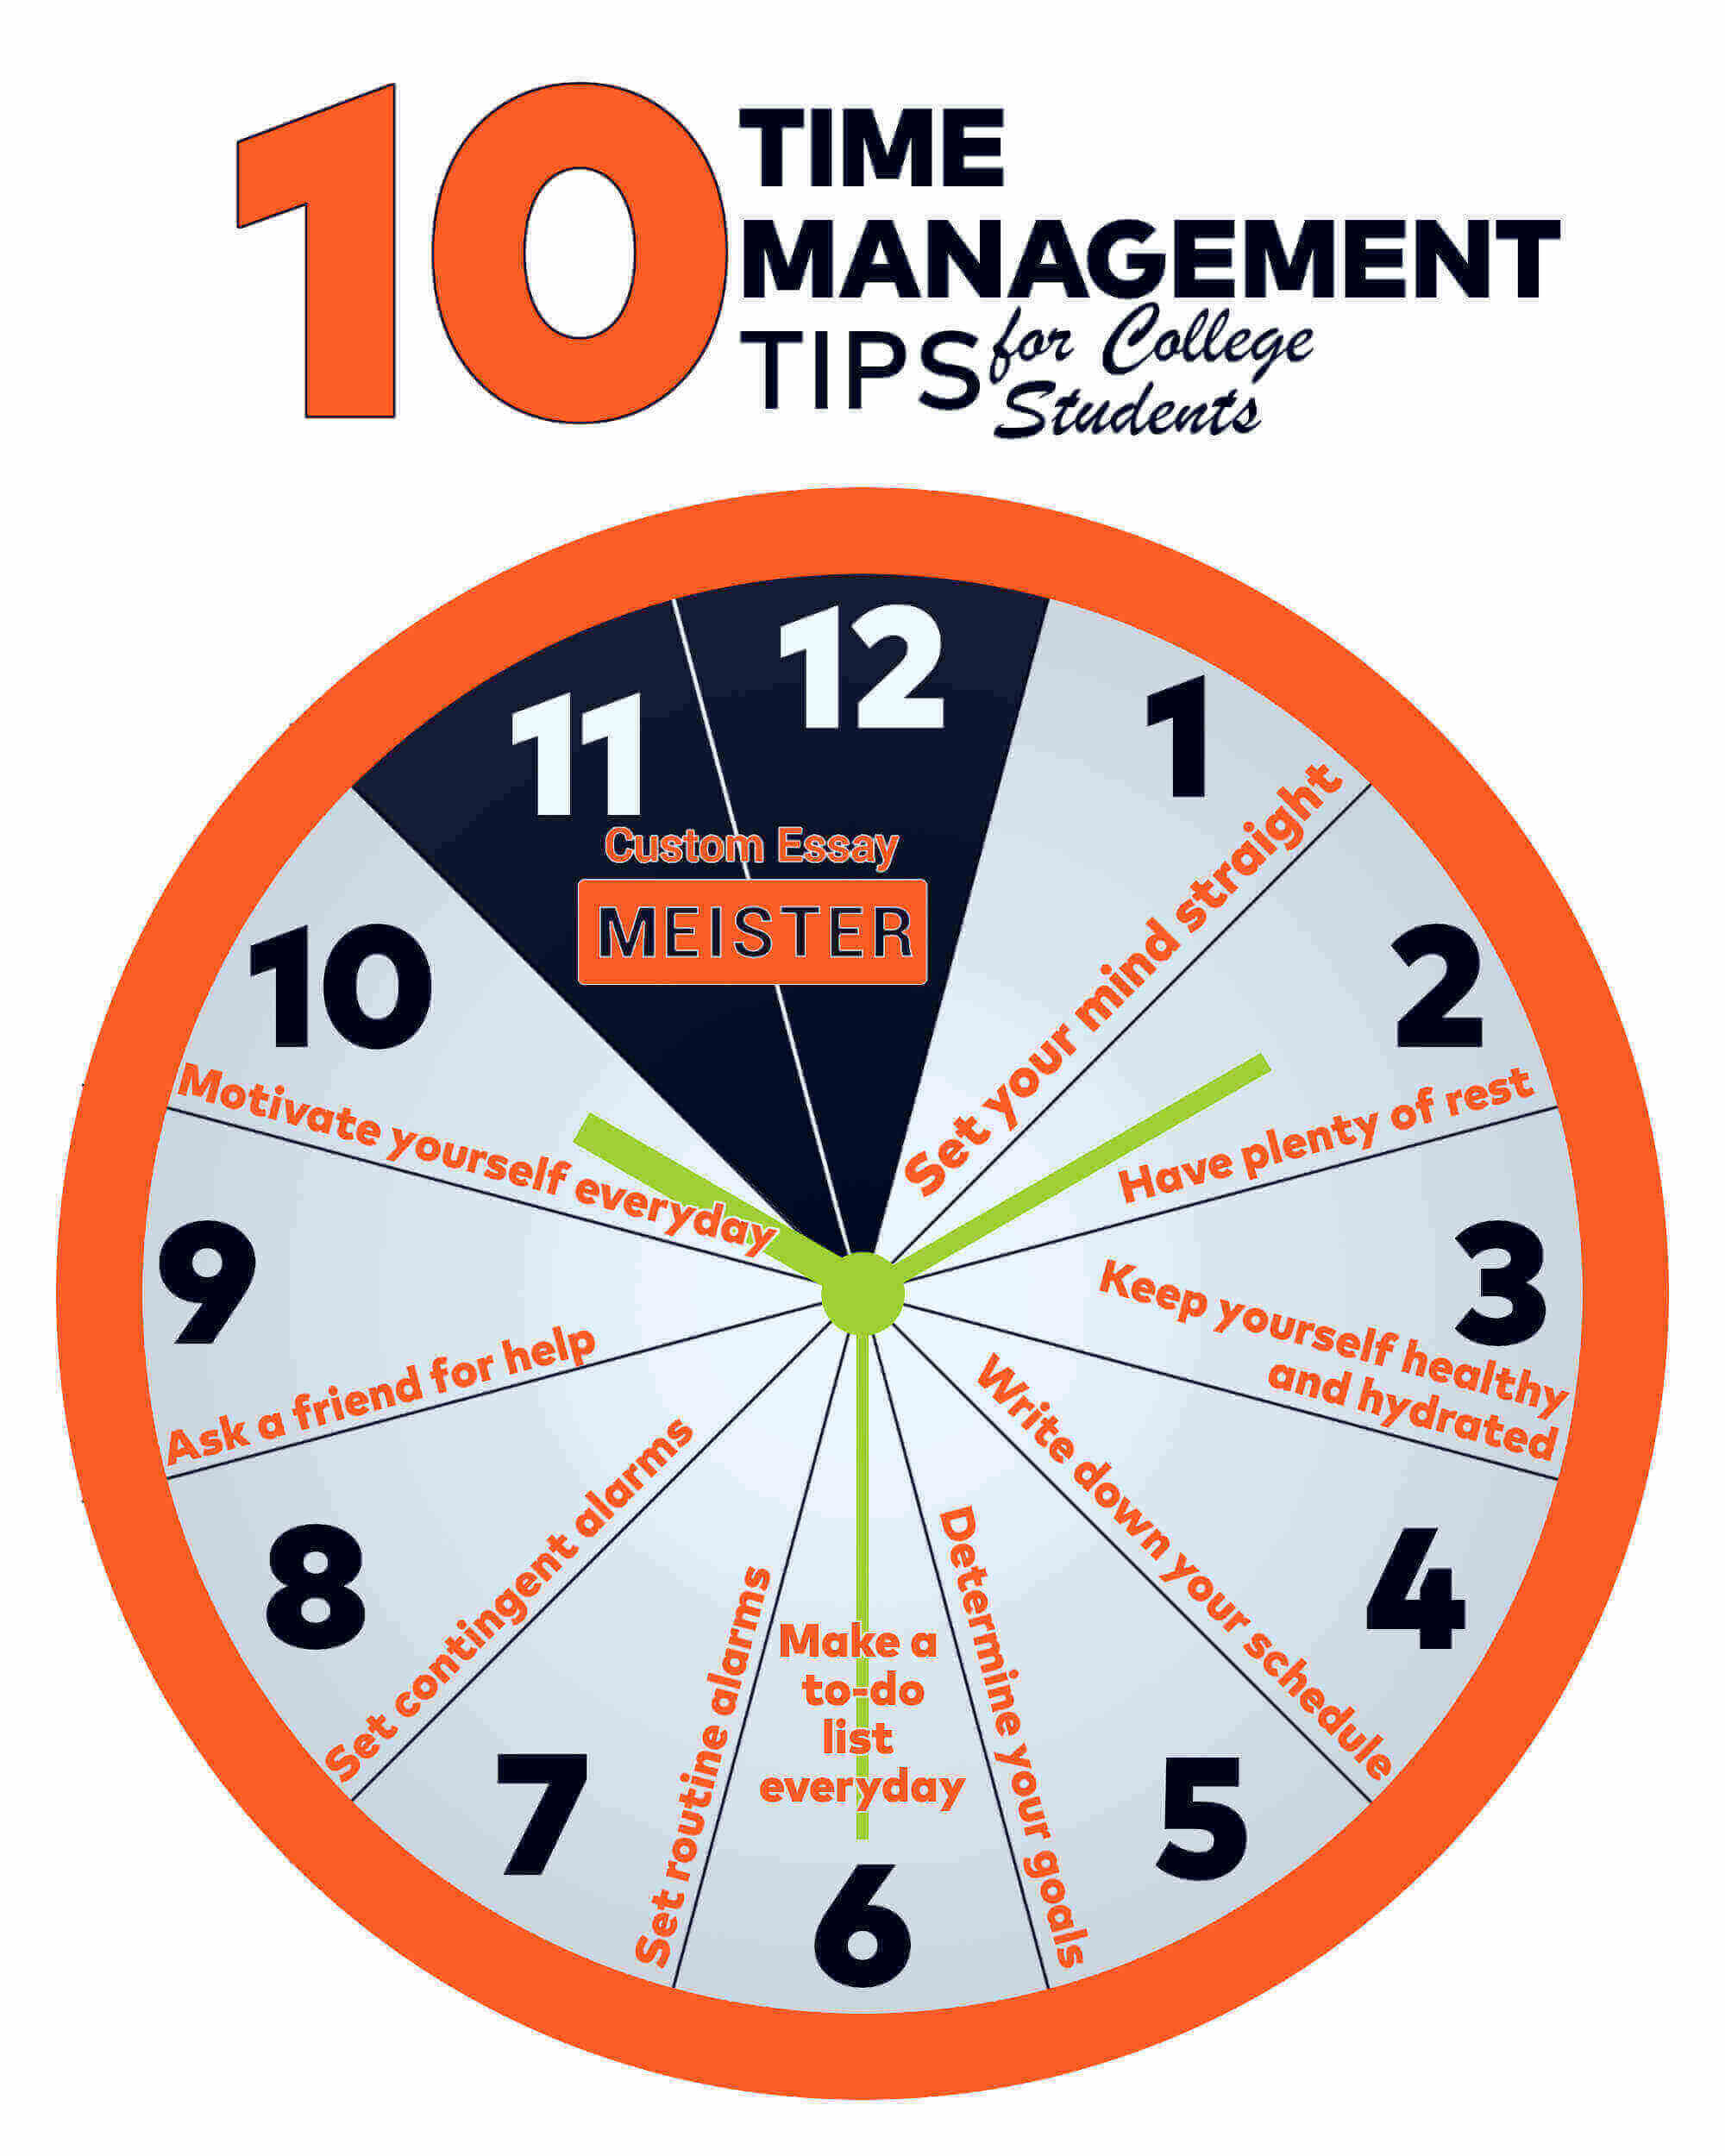 10-time-management-tips-for-college-students-customessaymeister